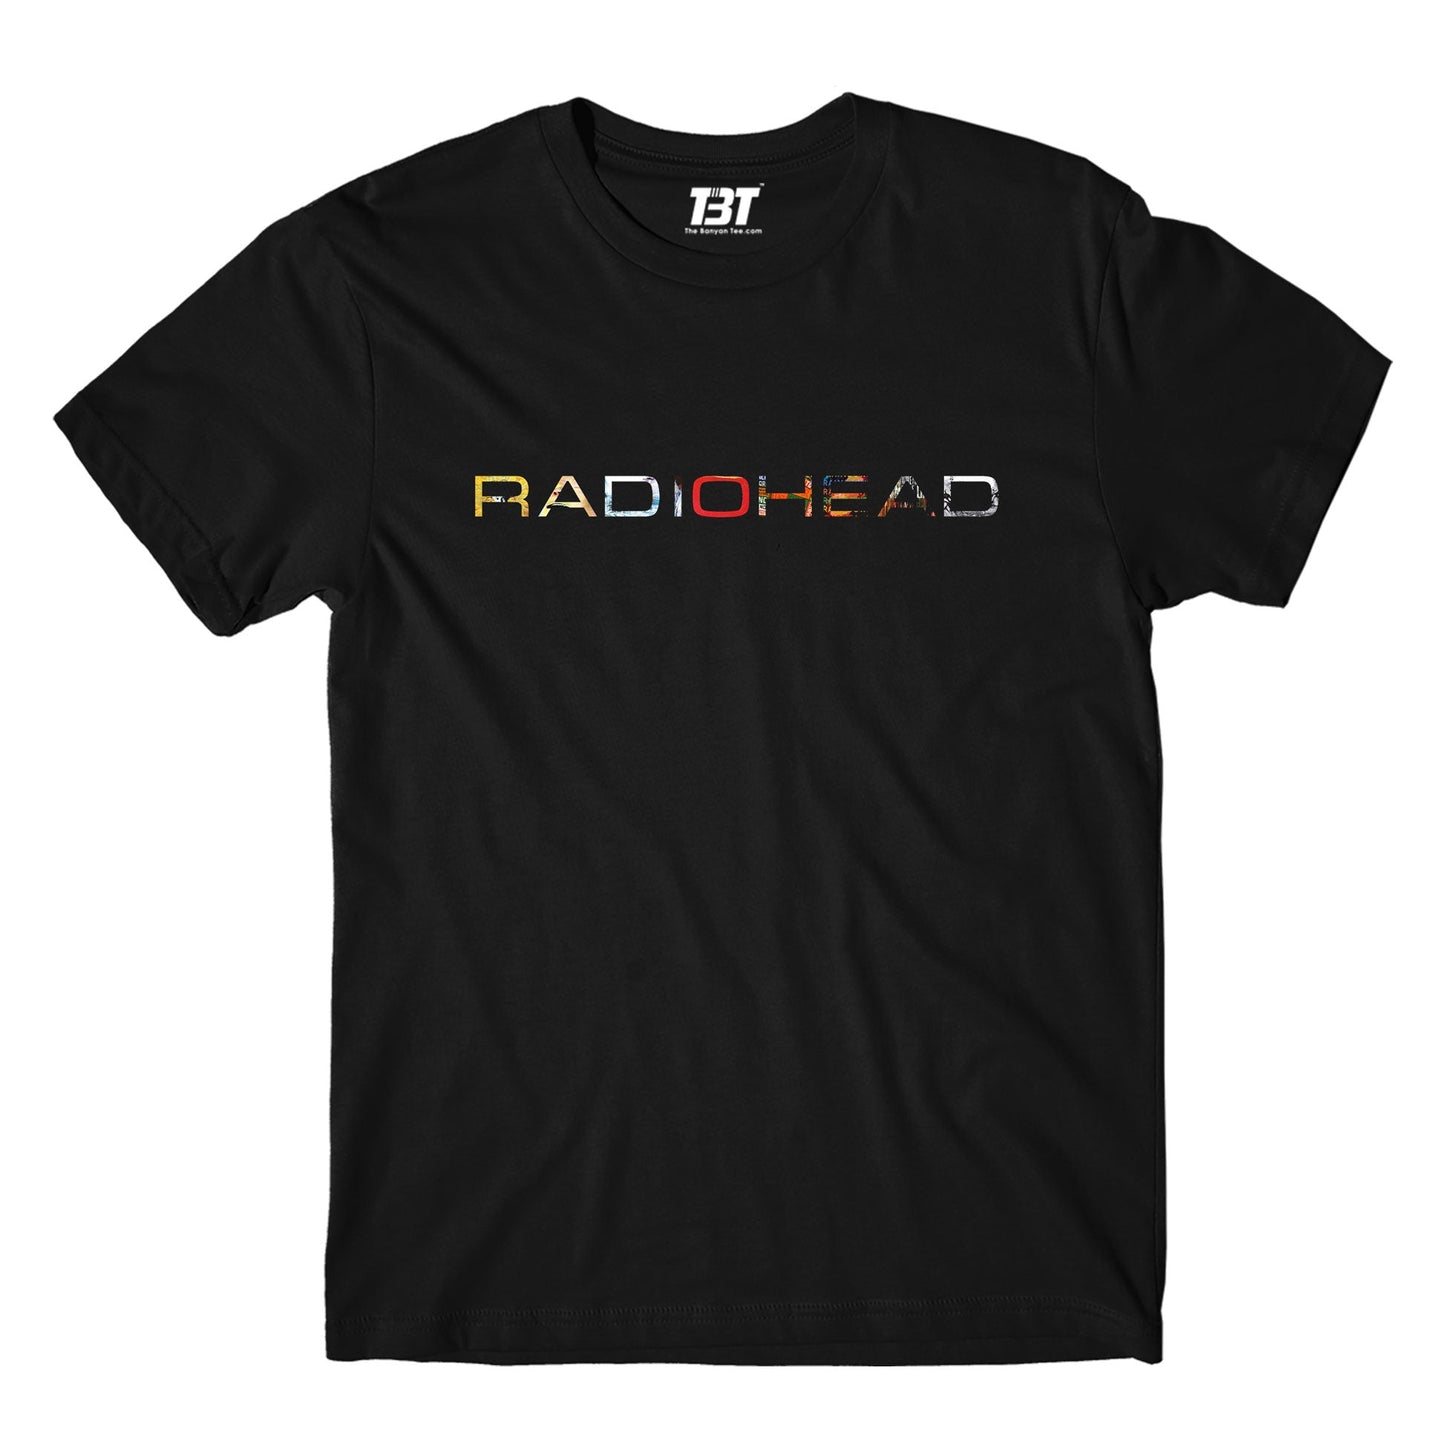 the banyan tee merch on sale Radiohead T shirt - On Sale - XS (Chest size 36 IN)